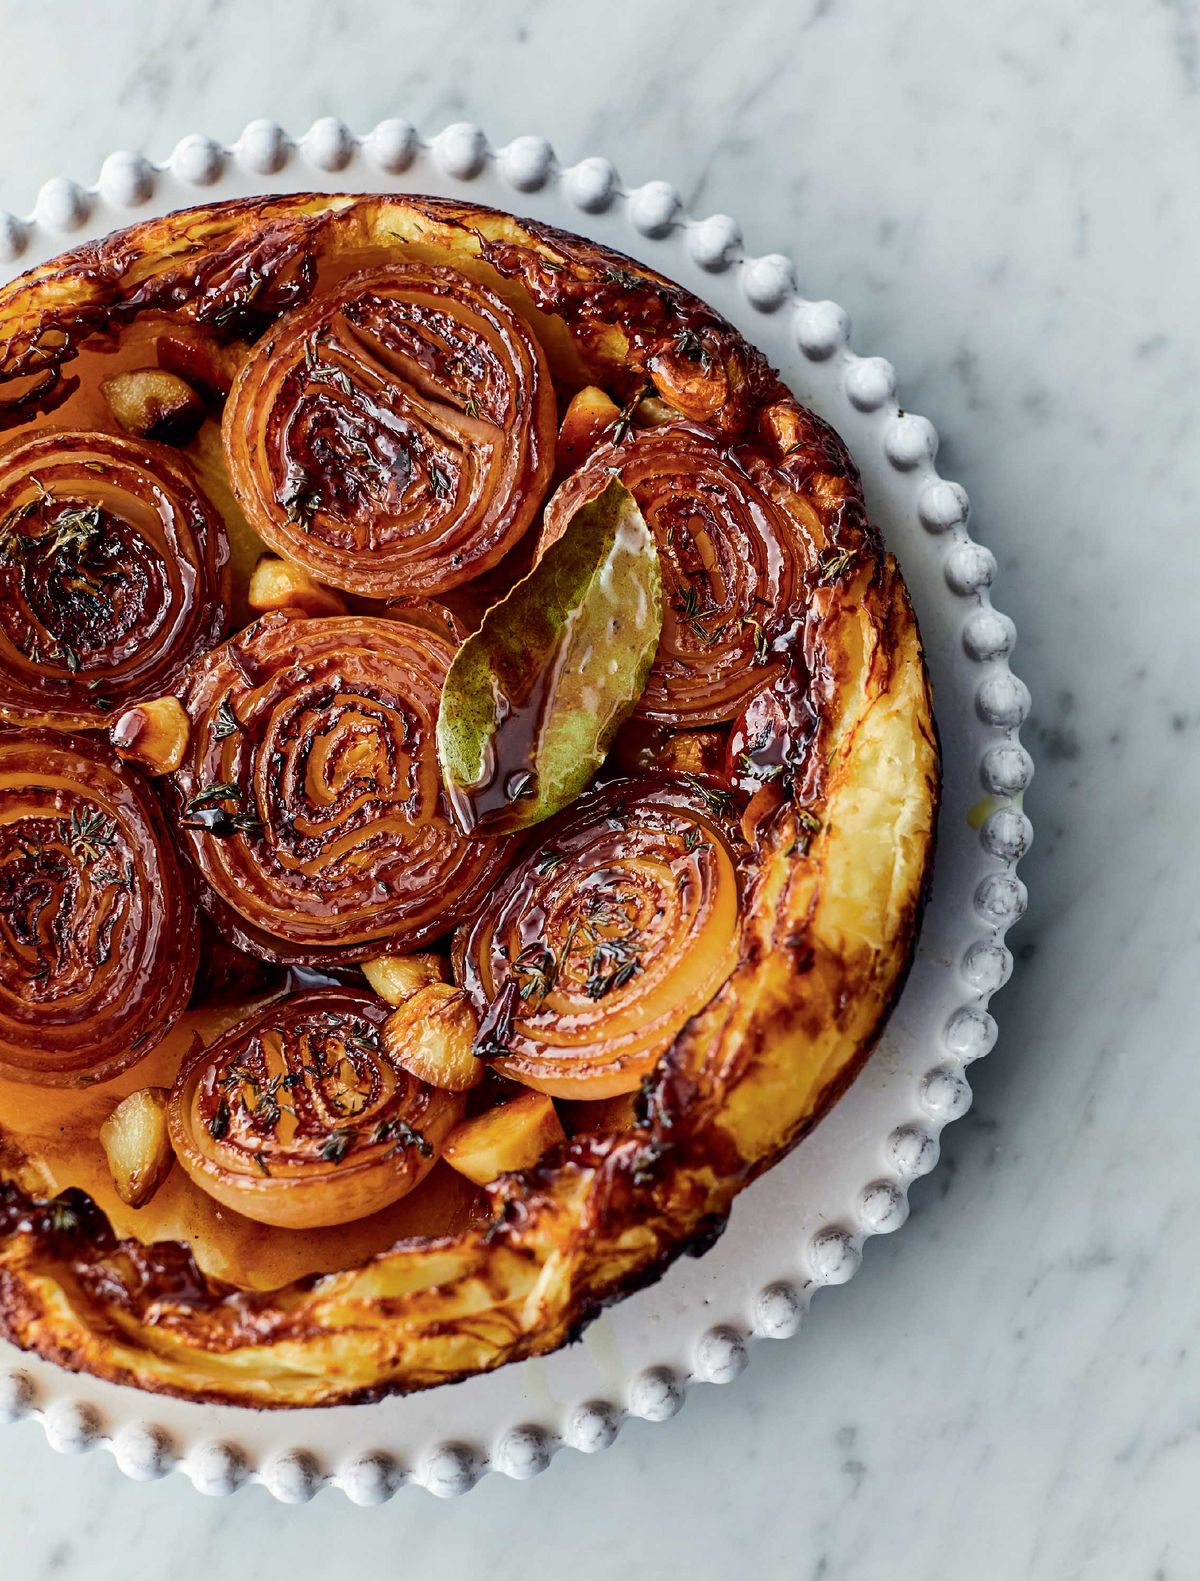 Jamie Oliver’s Sticky Onion Tart with Sweet Garlic, Fresh Thyme, Bay and Buttery Puff Pastry